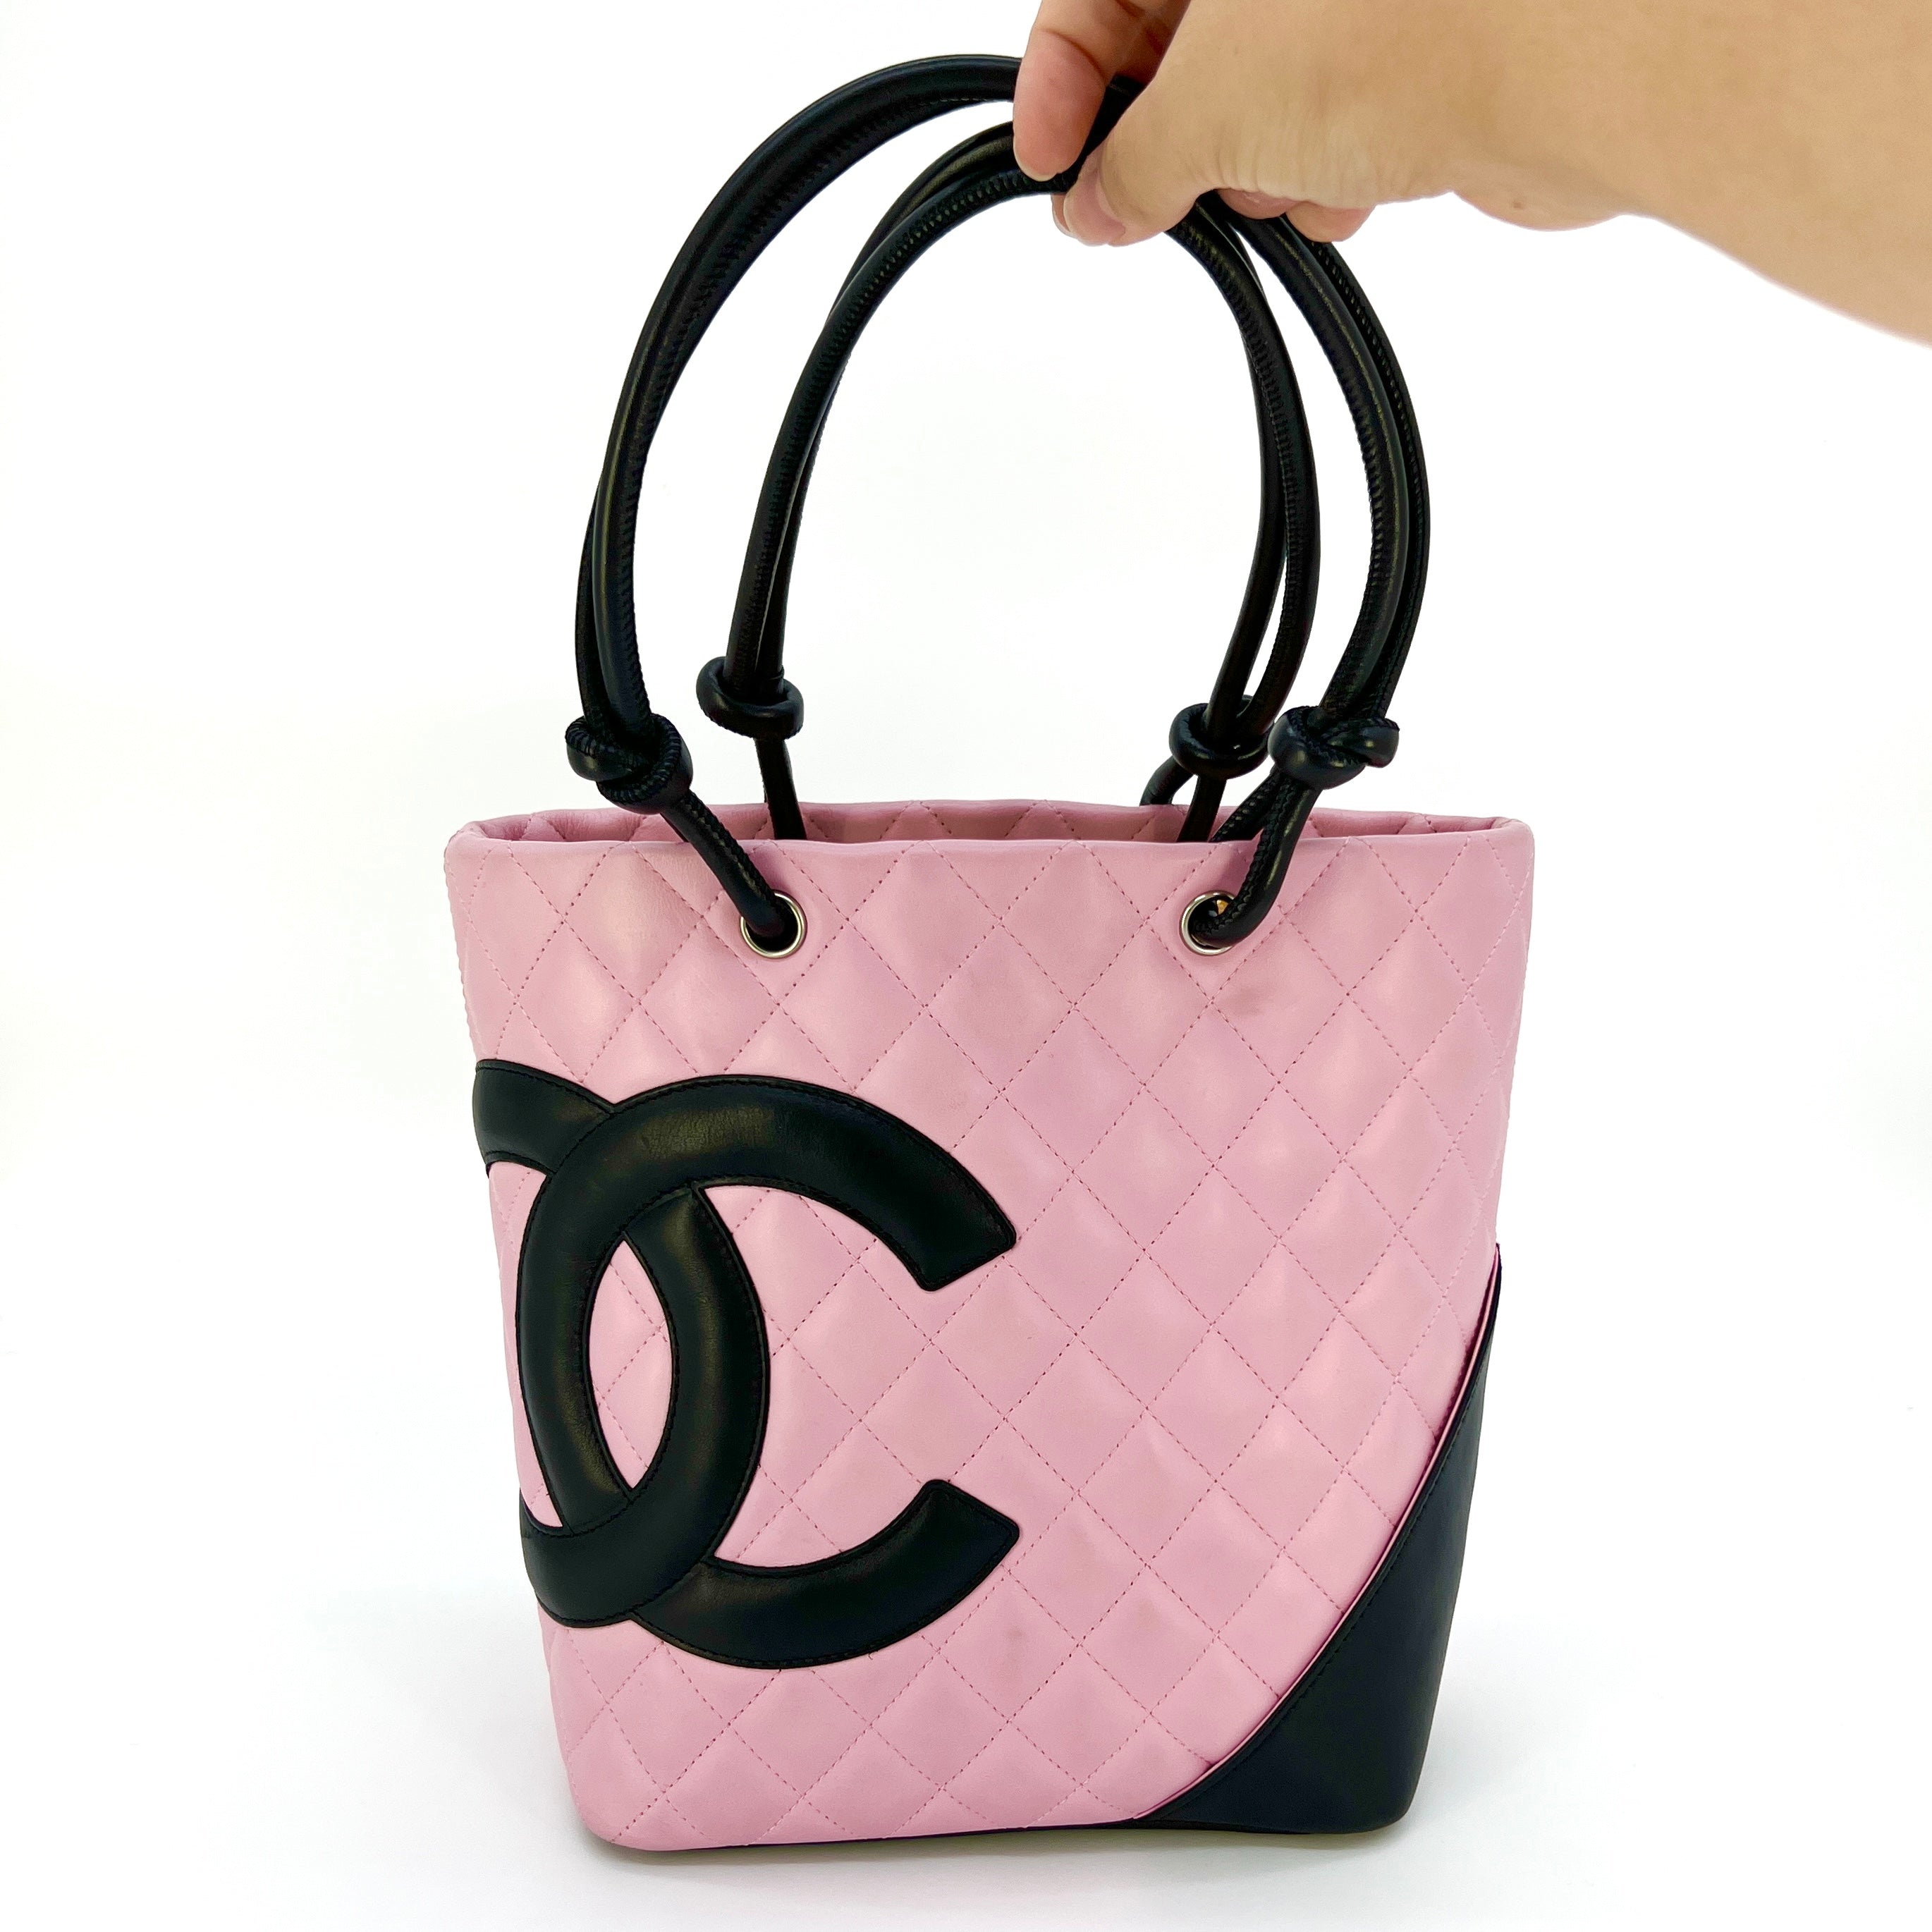 Chanel Quilted Medium Cambon Tote